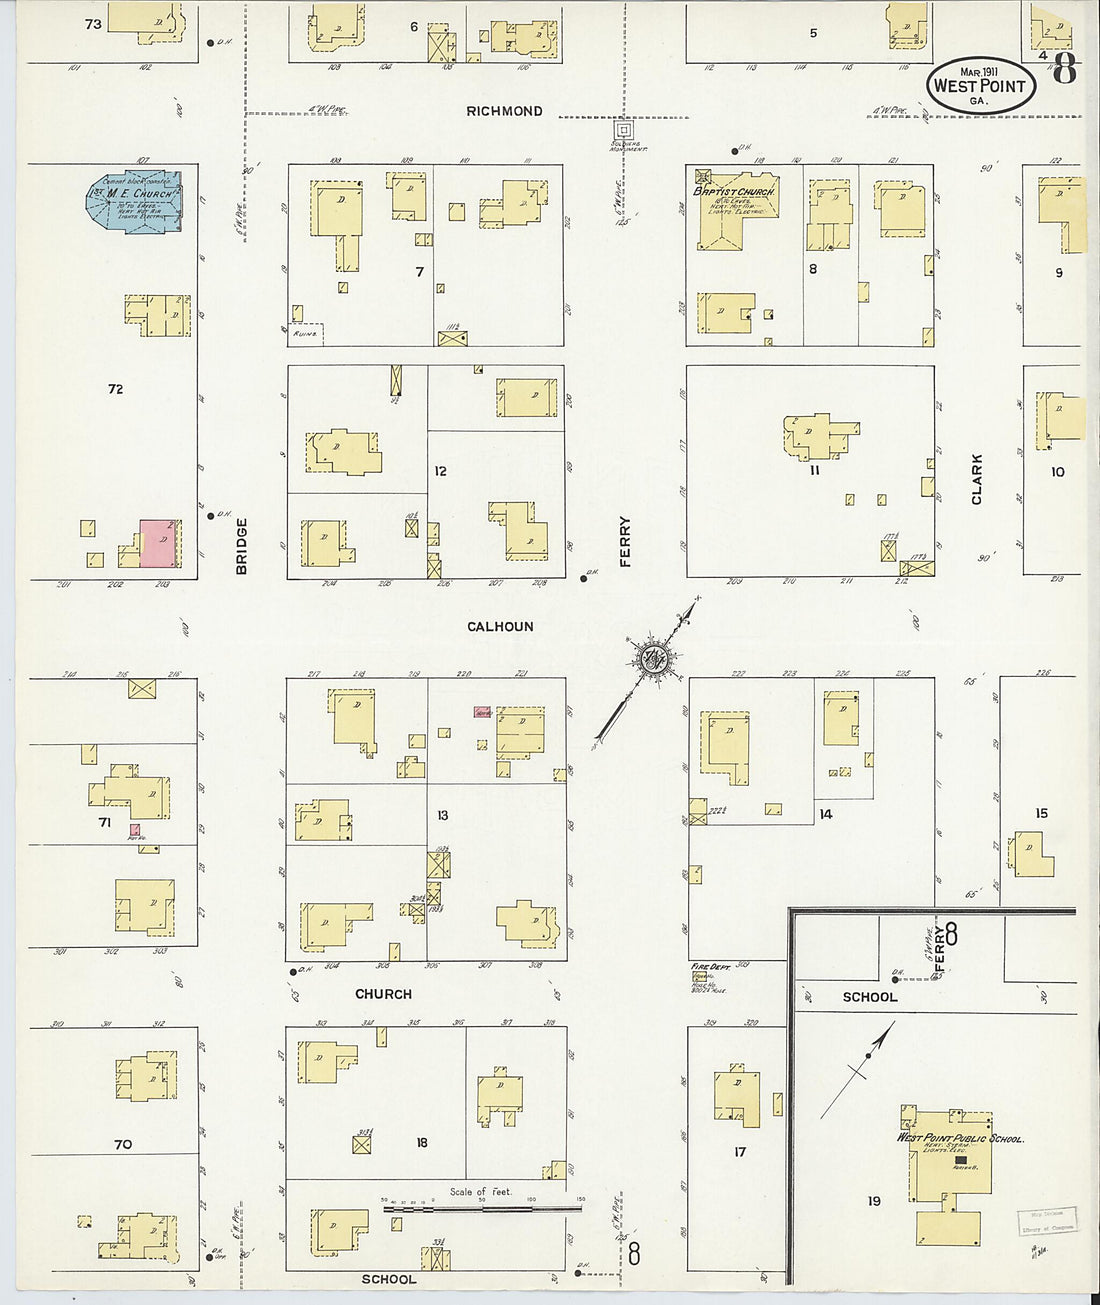 This old map of West Point, Troup County, Georgia was created by Sanborn Map Company in 1911